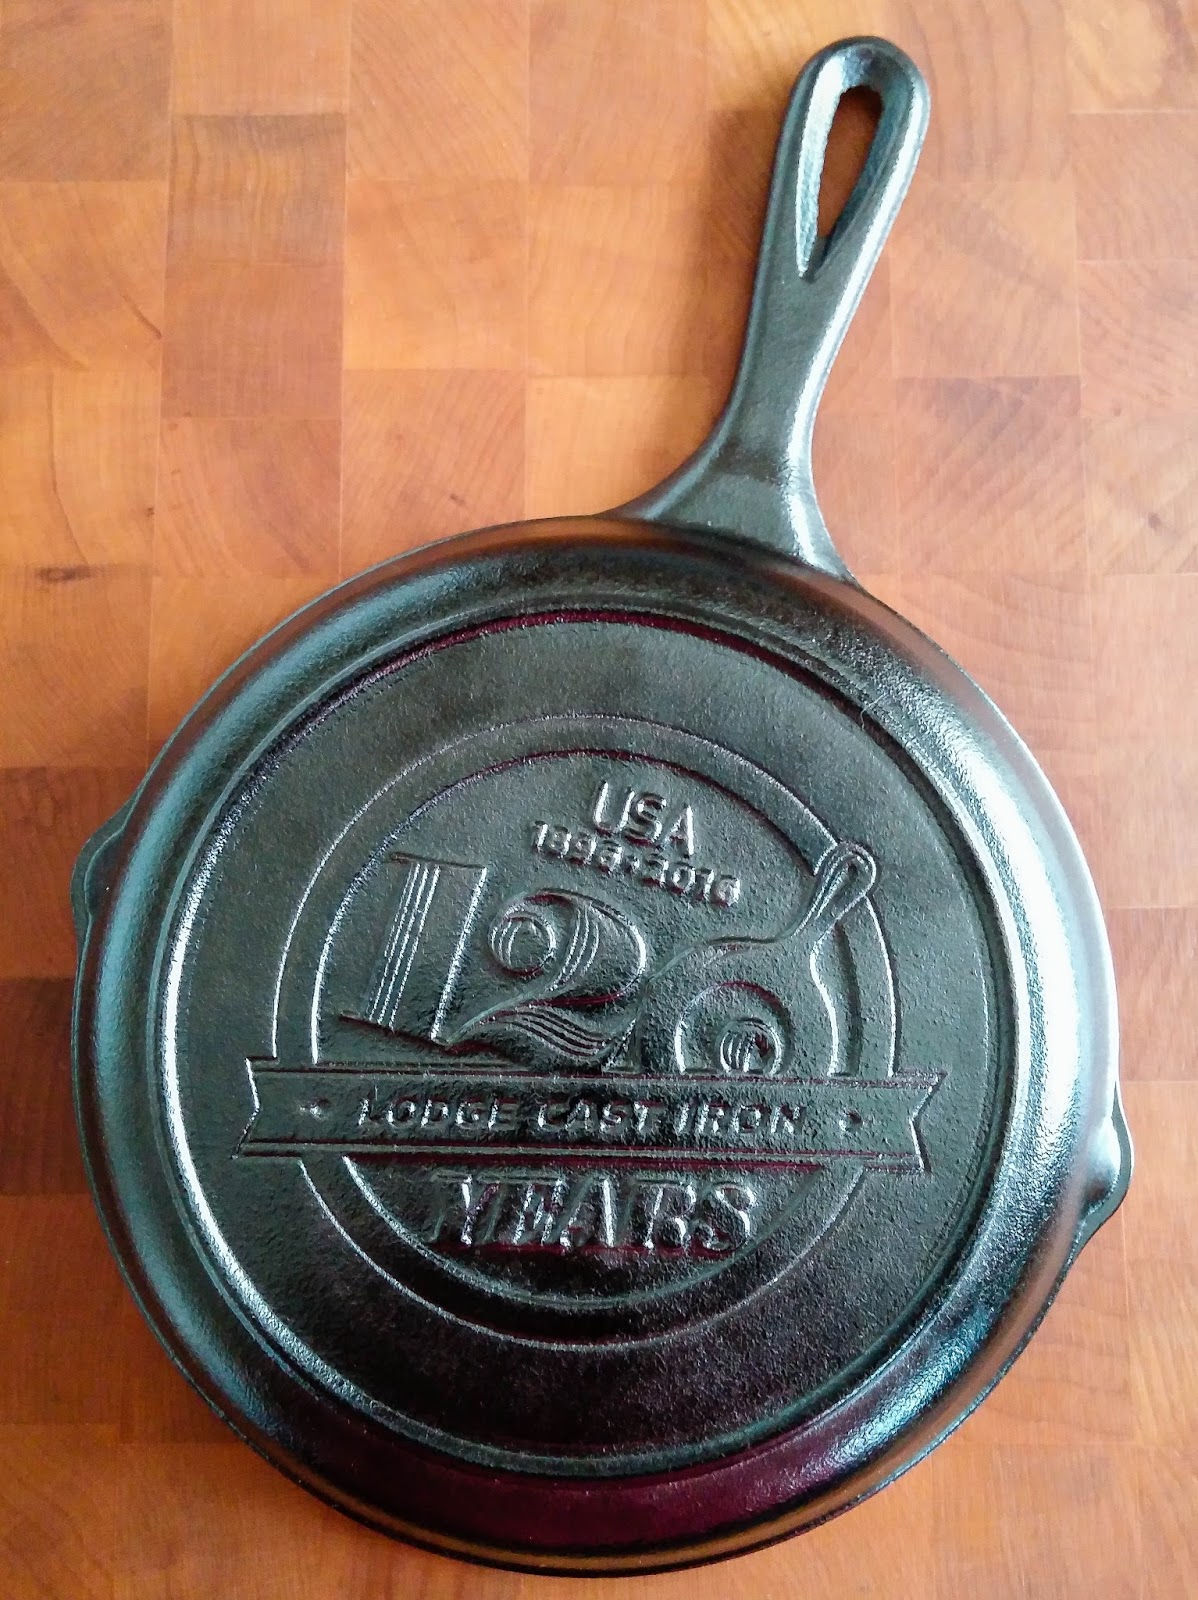 Finex Cast Iron Skillet Review: An Artful Way to Cook